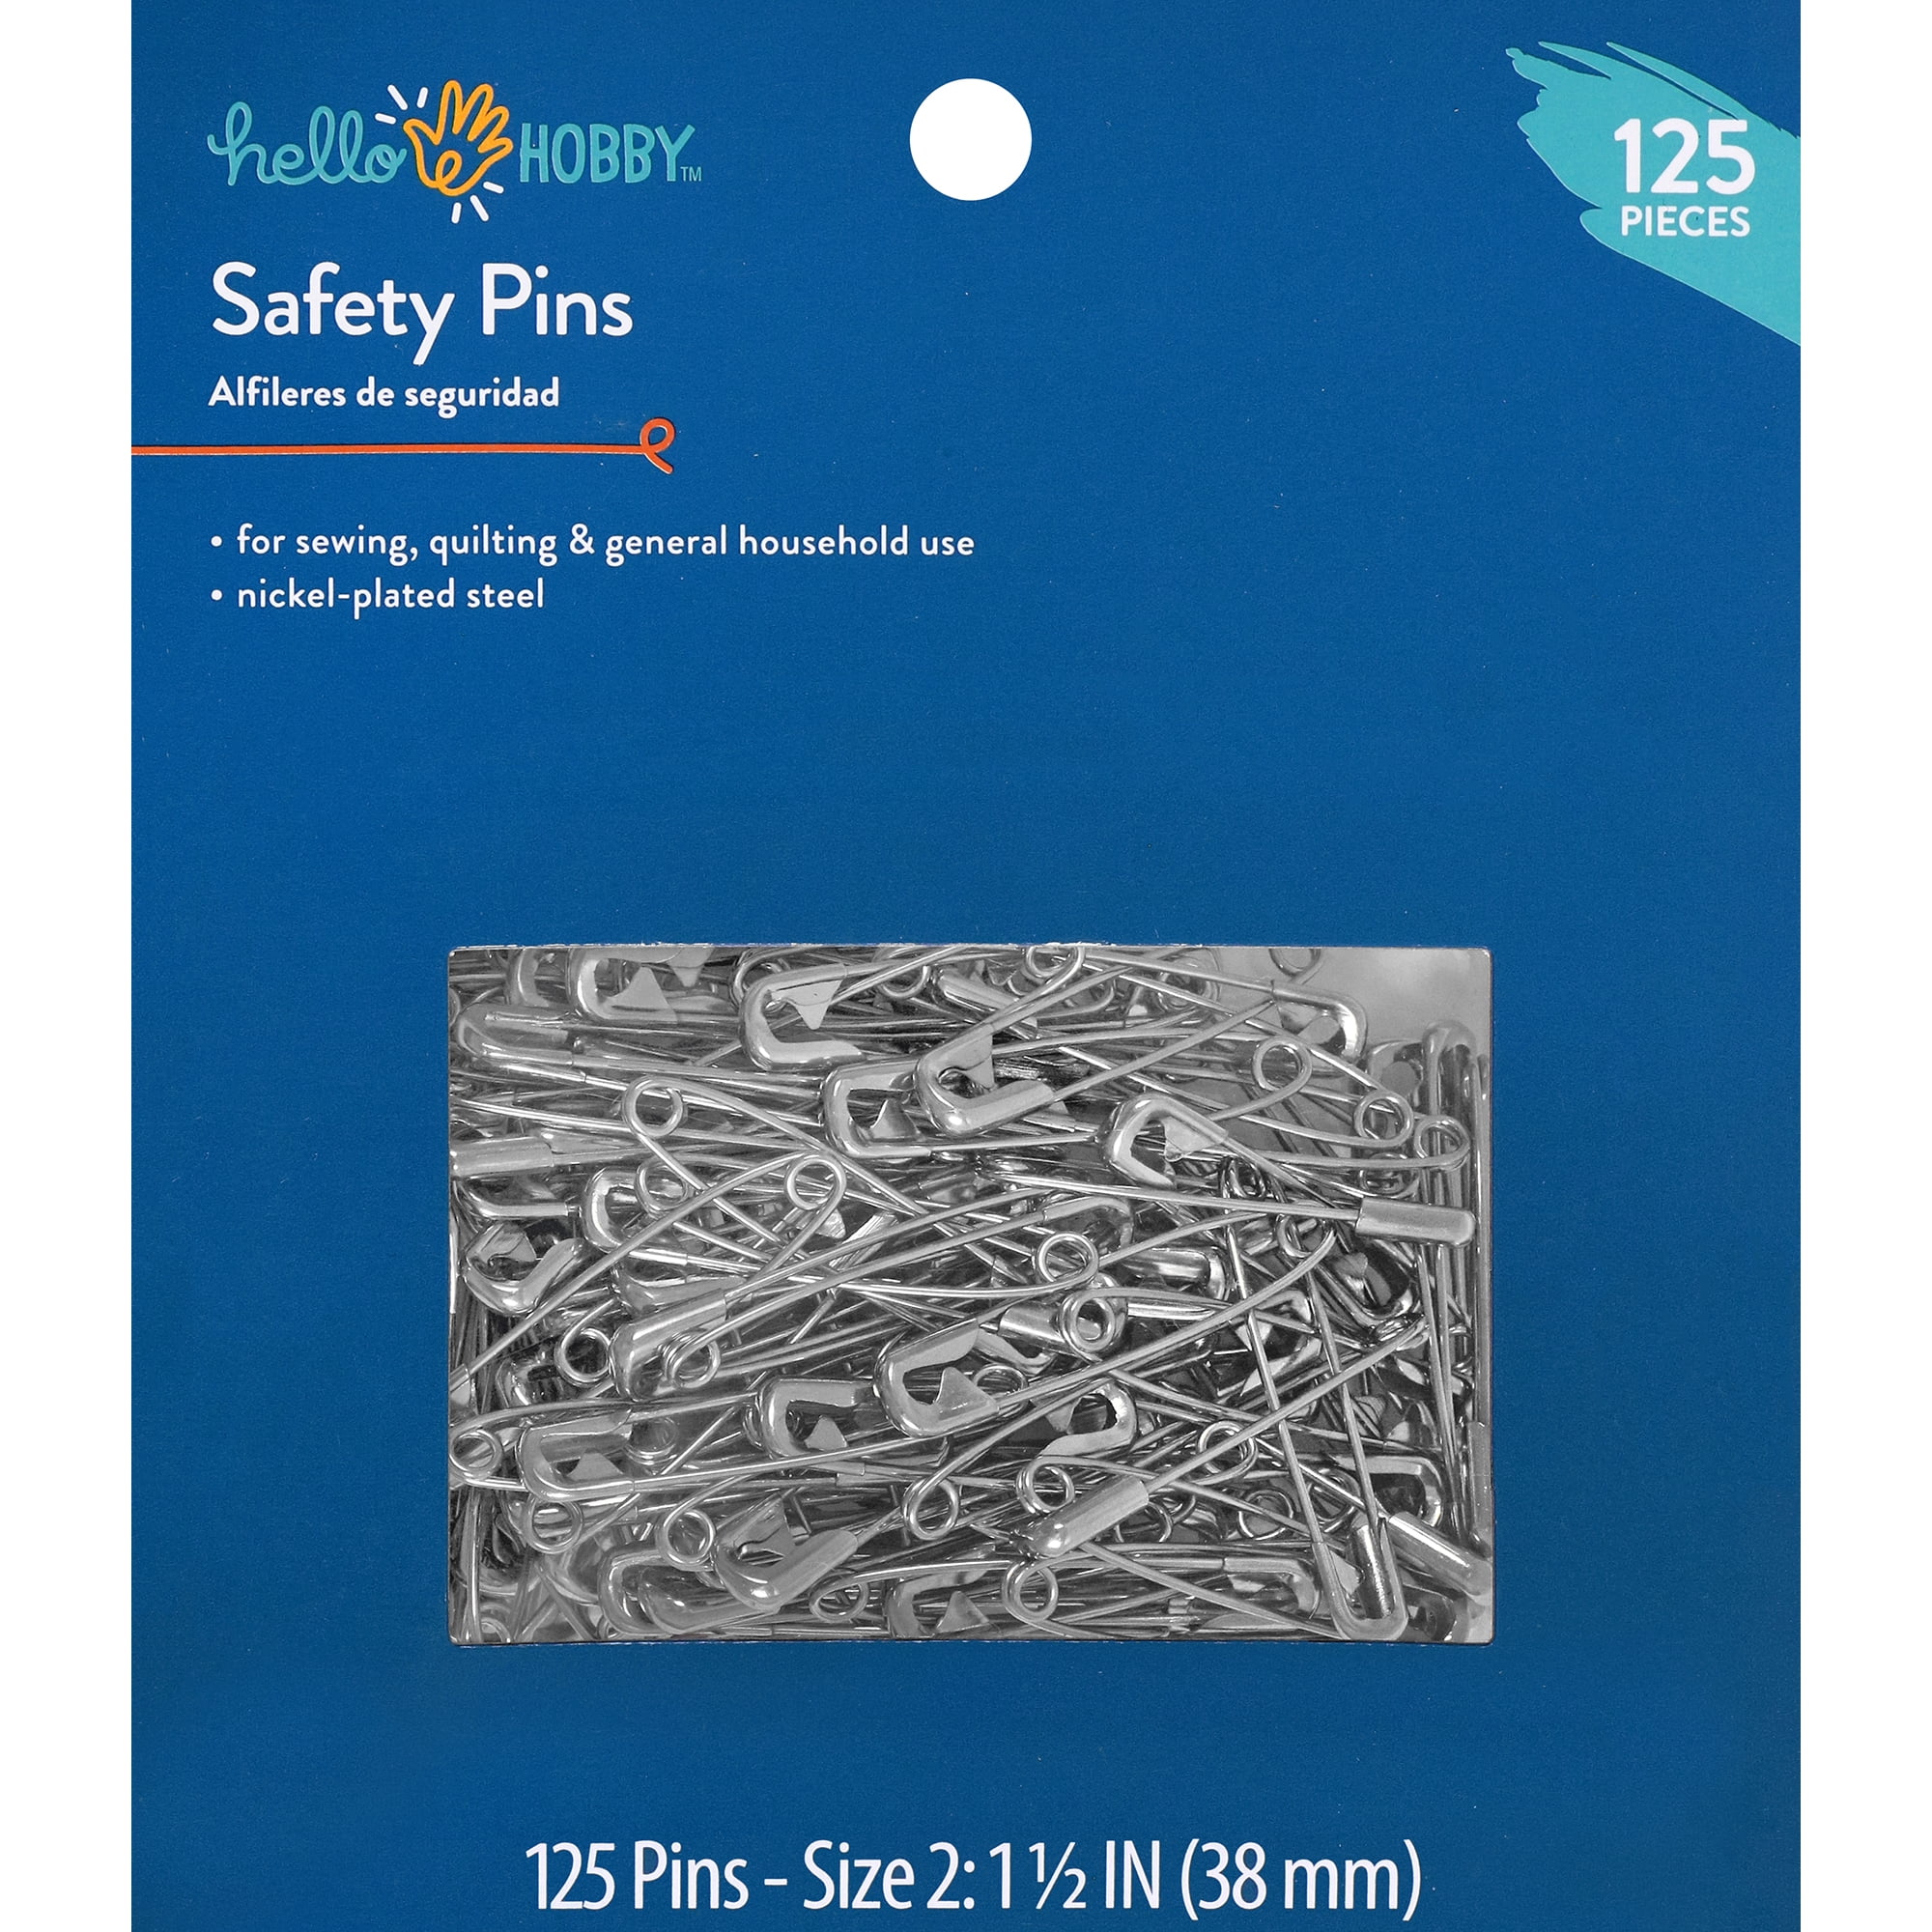 Hello Hobby Size 2 Steel Silver Safety Pins (125 Count) - Walmart.com